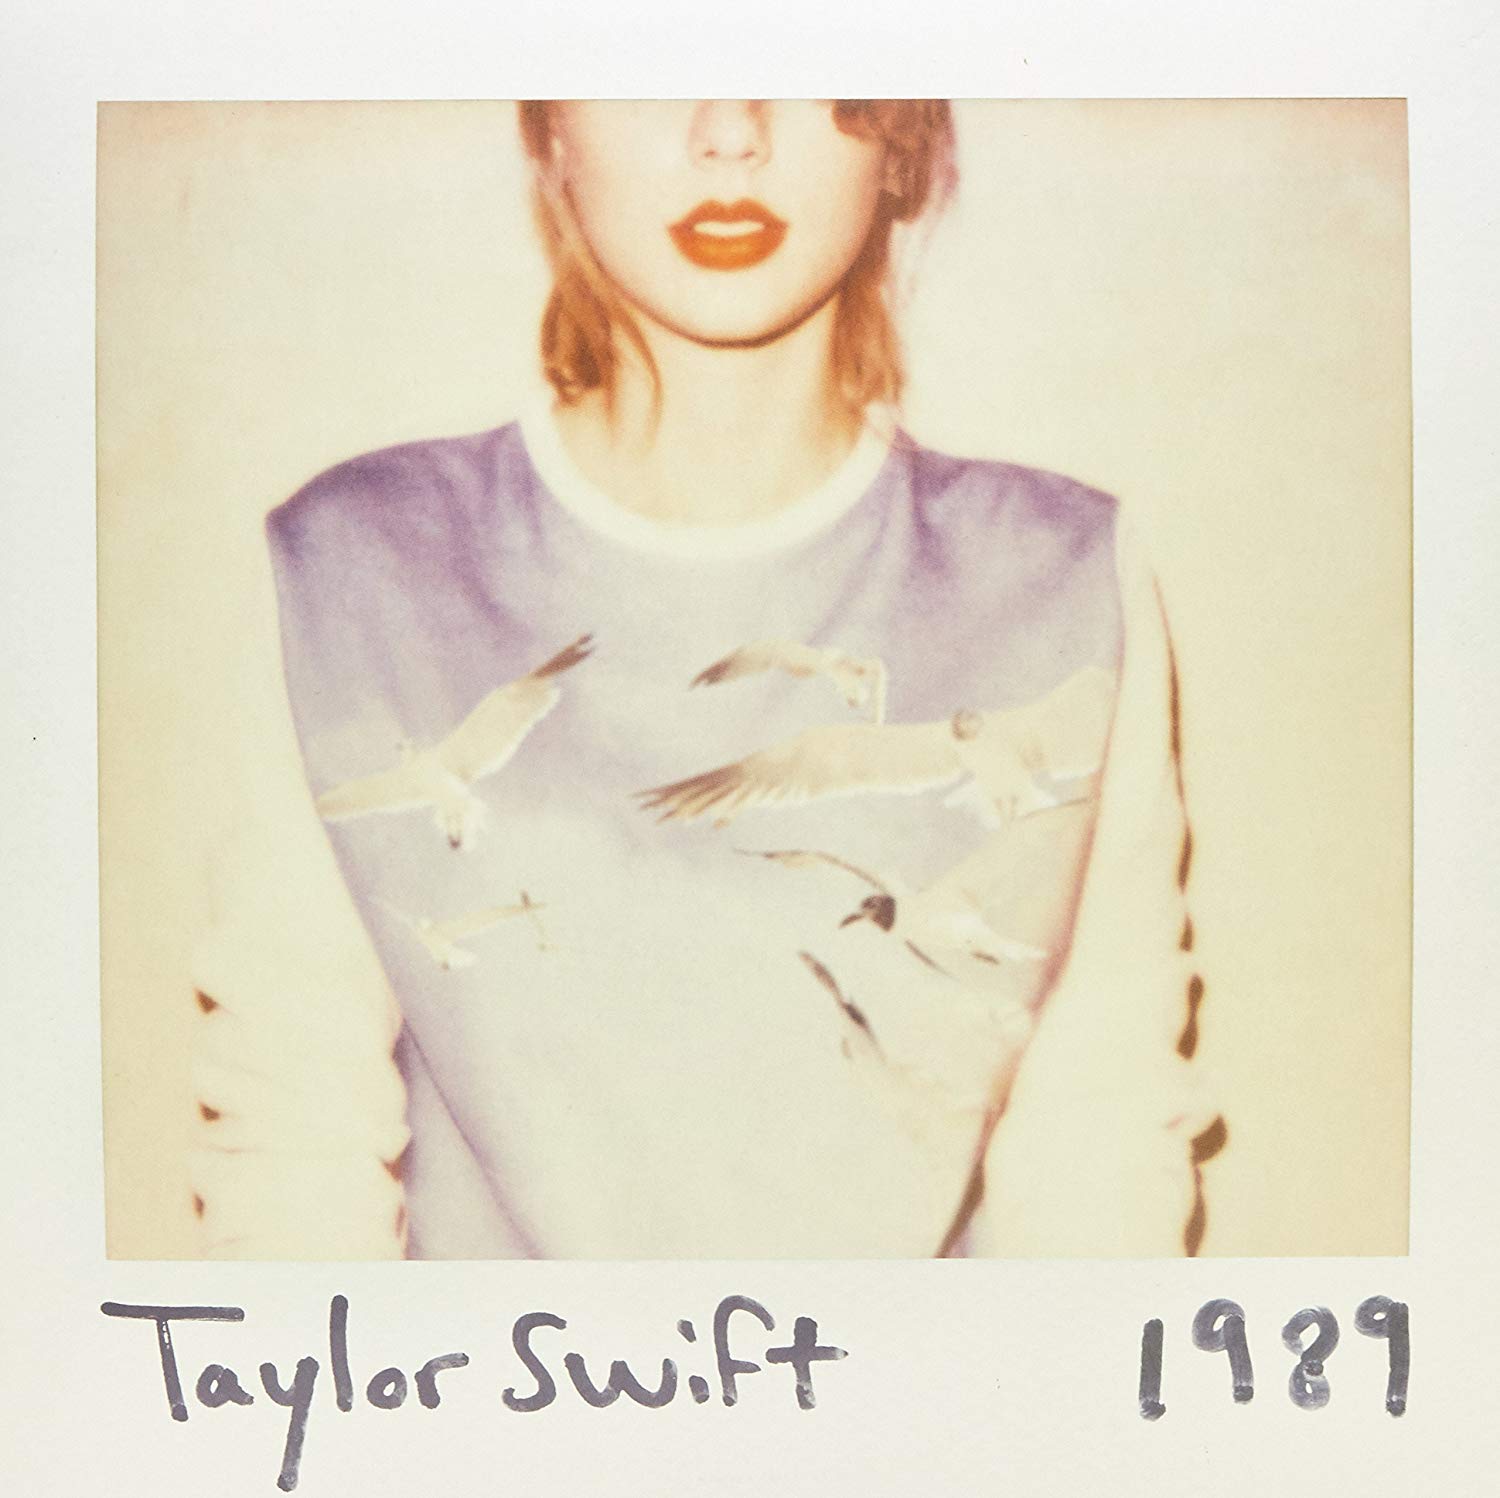 billboard-200-taylor-swift-s-1989-returns-to-the-top-10-for-the